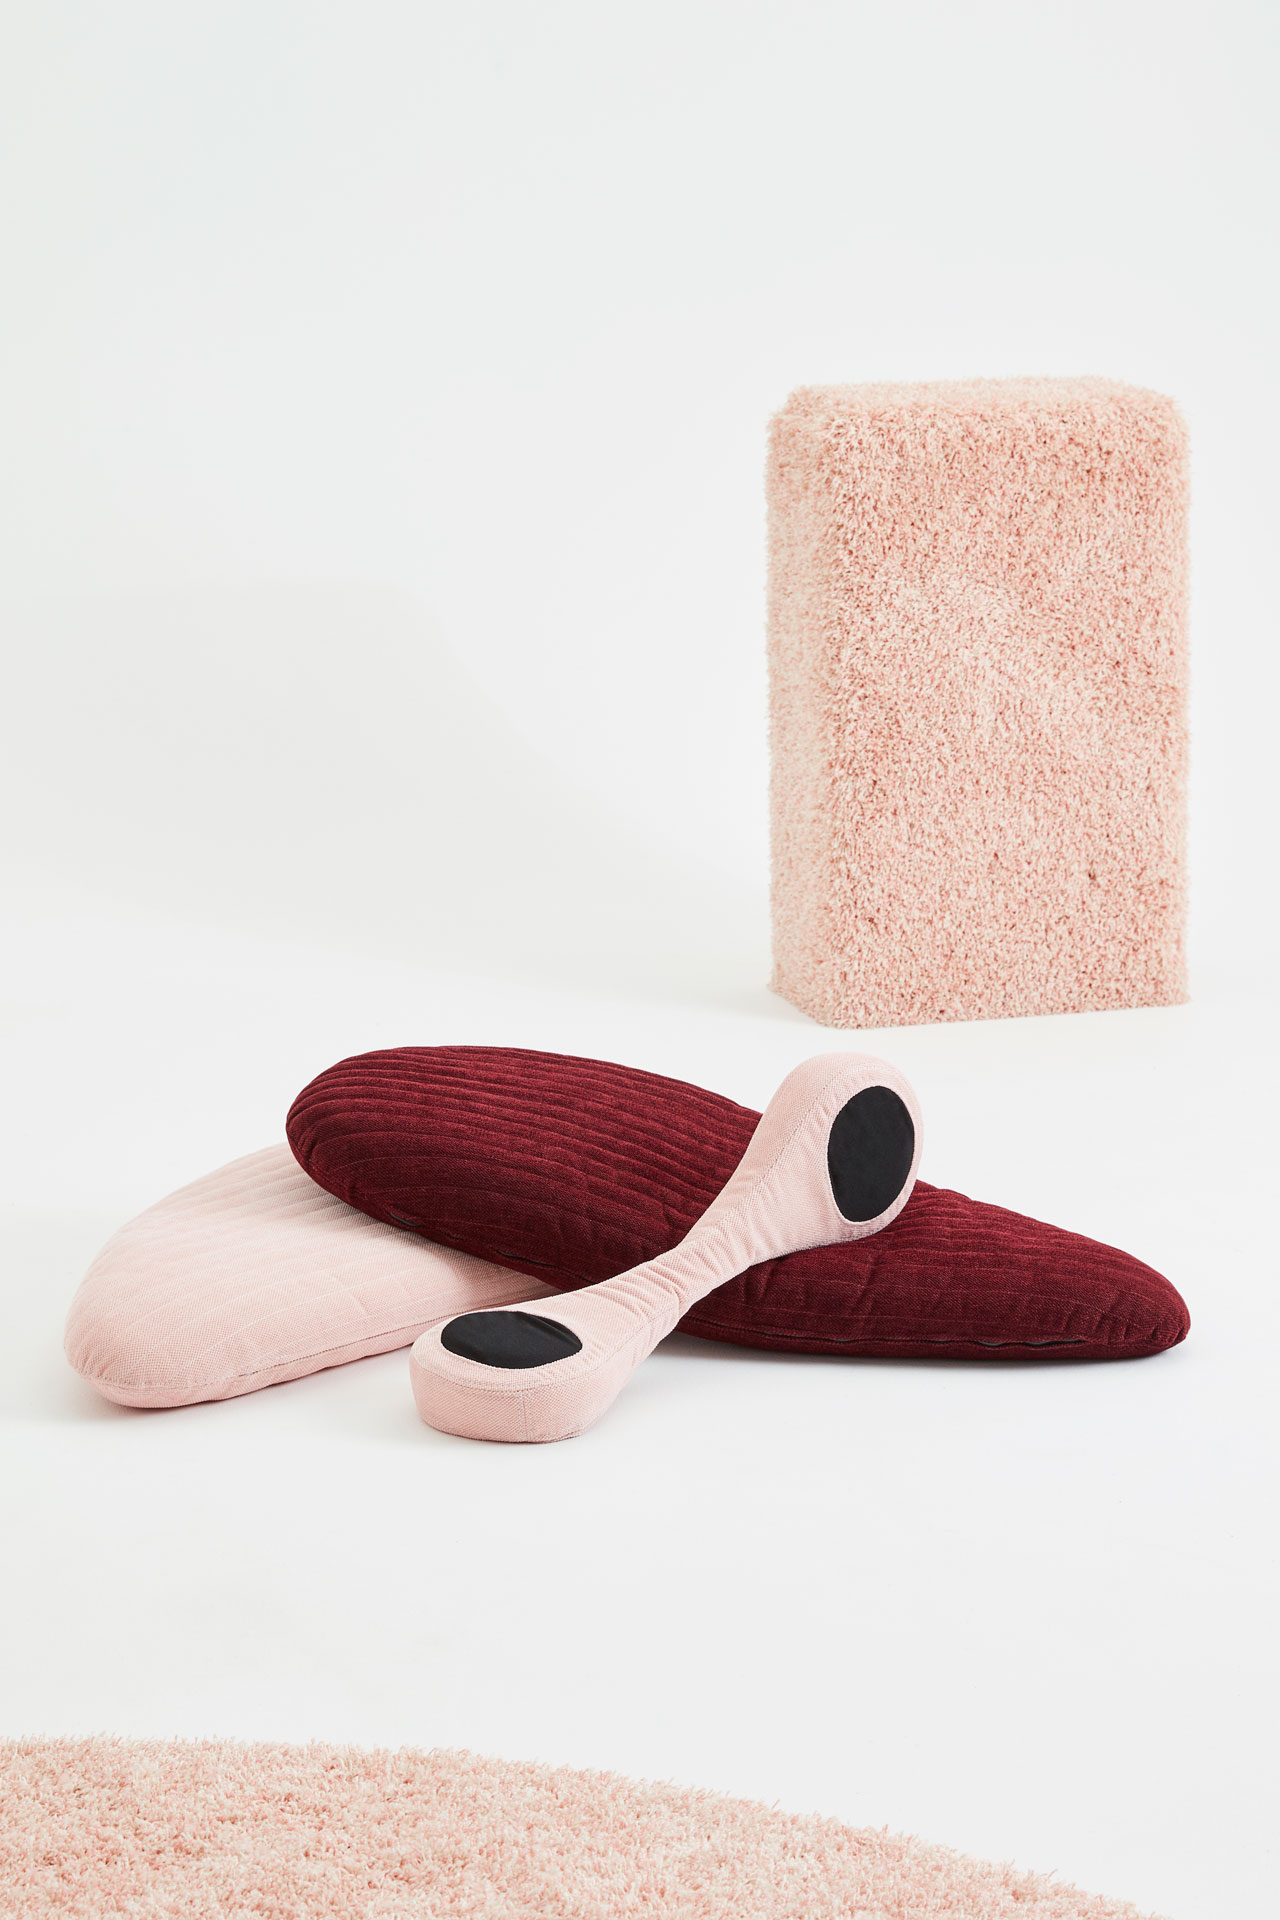 Pallium line of tactile products by Lise Vester, part of the exhibition “Remedy Rush” by the students from the furniture speciality at VIA Design. A collection designed for people with either physical or mental challenges.